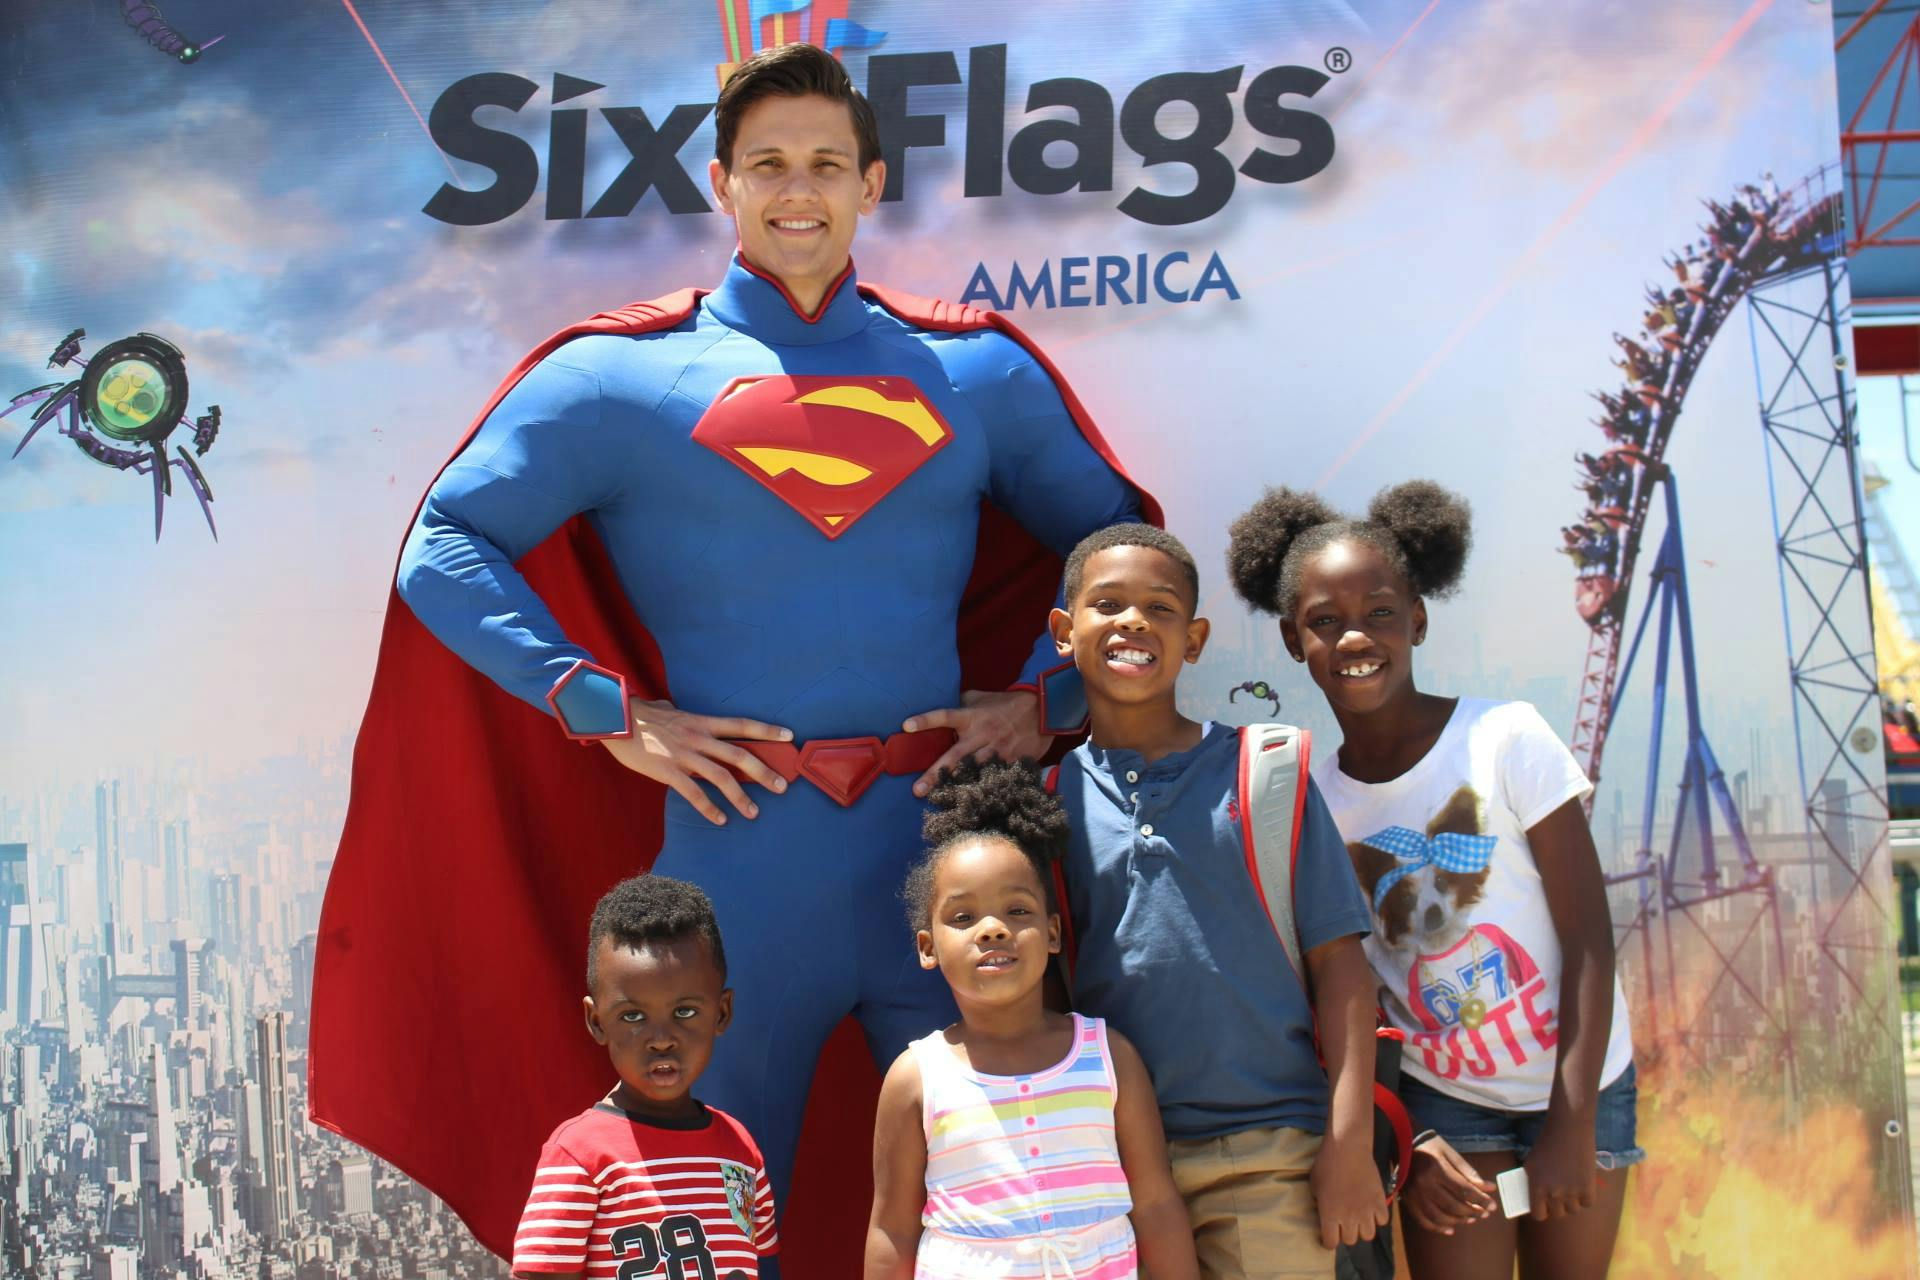 For children posing for a photo with a man dressed as superman at six flags America amusement park